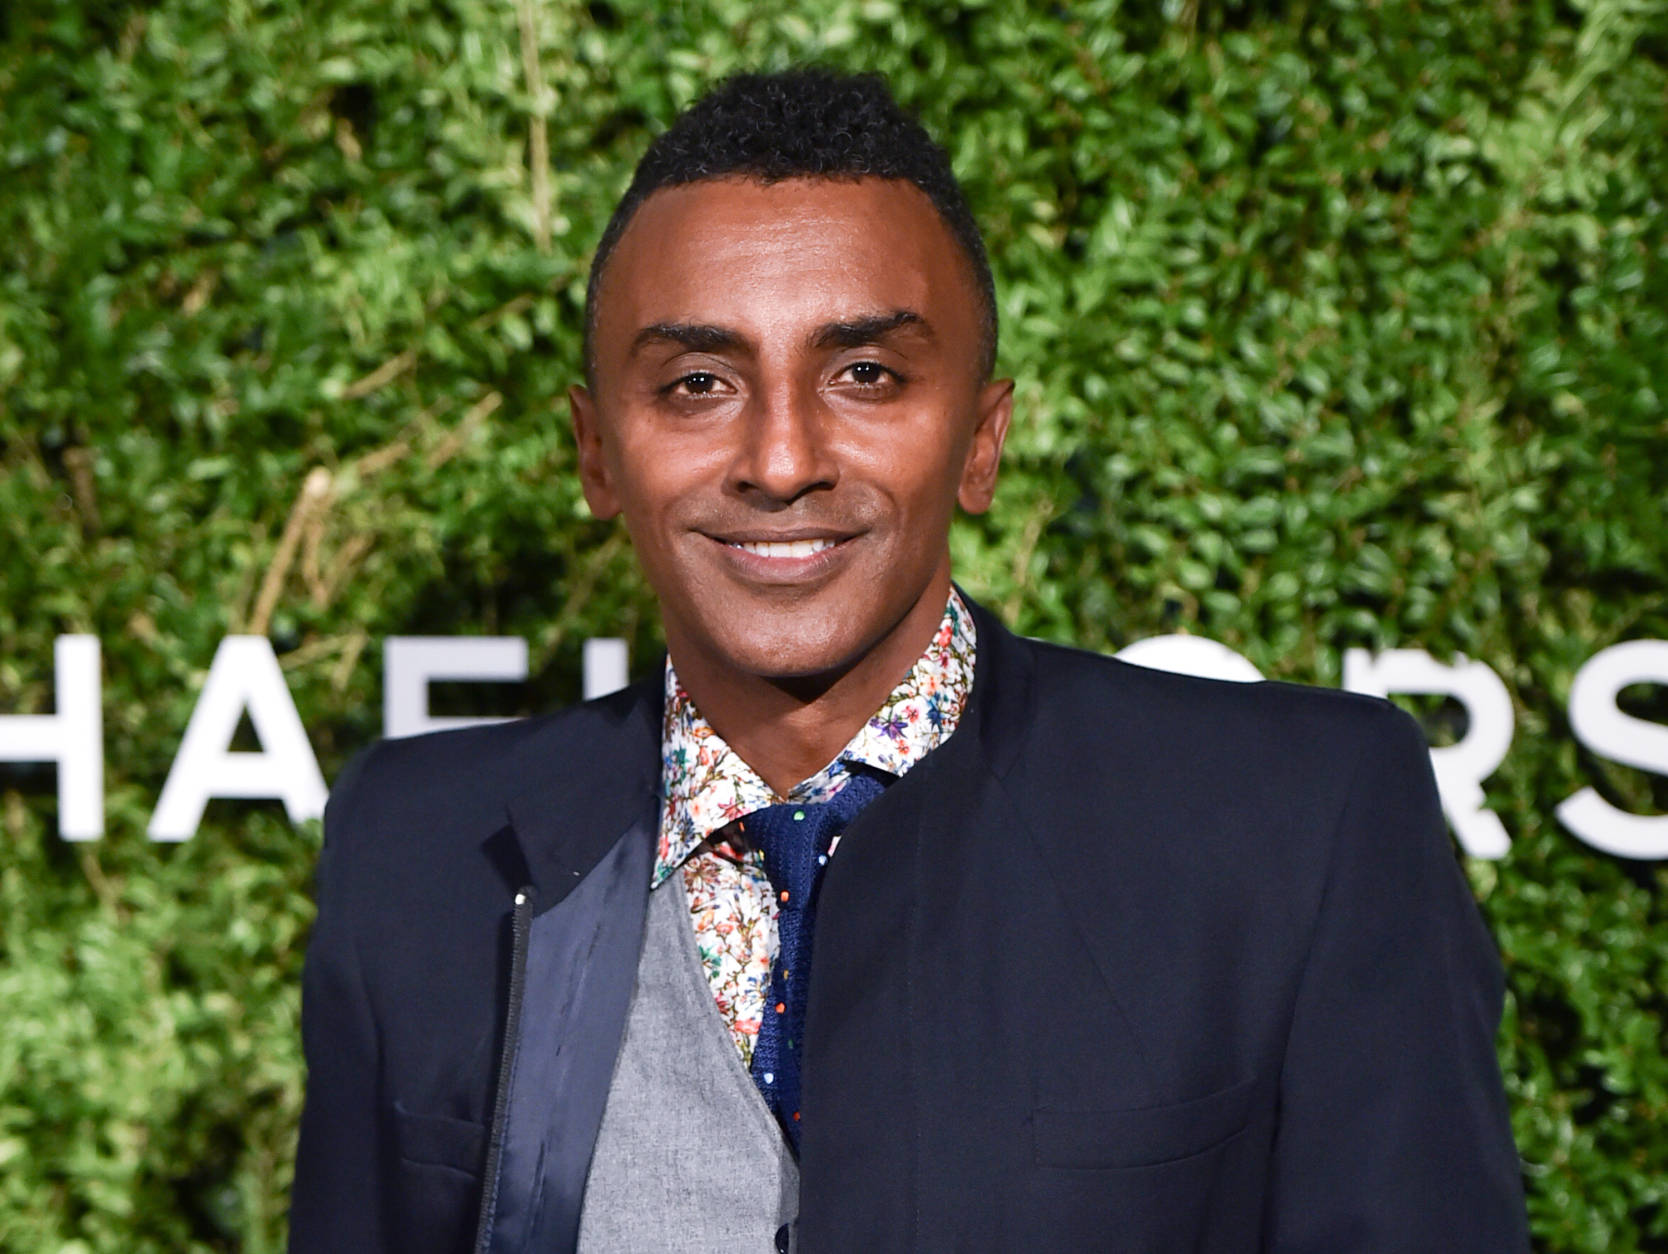 Chef Marcus Samuelsson attends the "God's Love We Deliver" Golden Heart Awards at Spring Studios on Monday, Oct. 17, 2016, in New York. (Photo By Evan Agostini/Invision/AP)